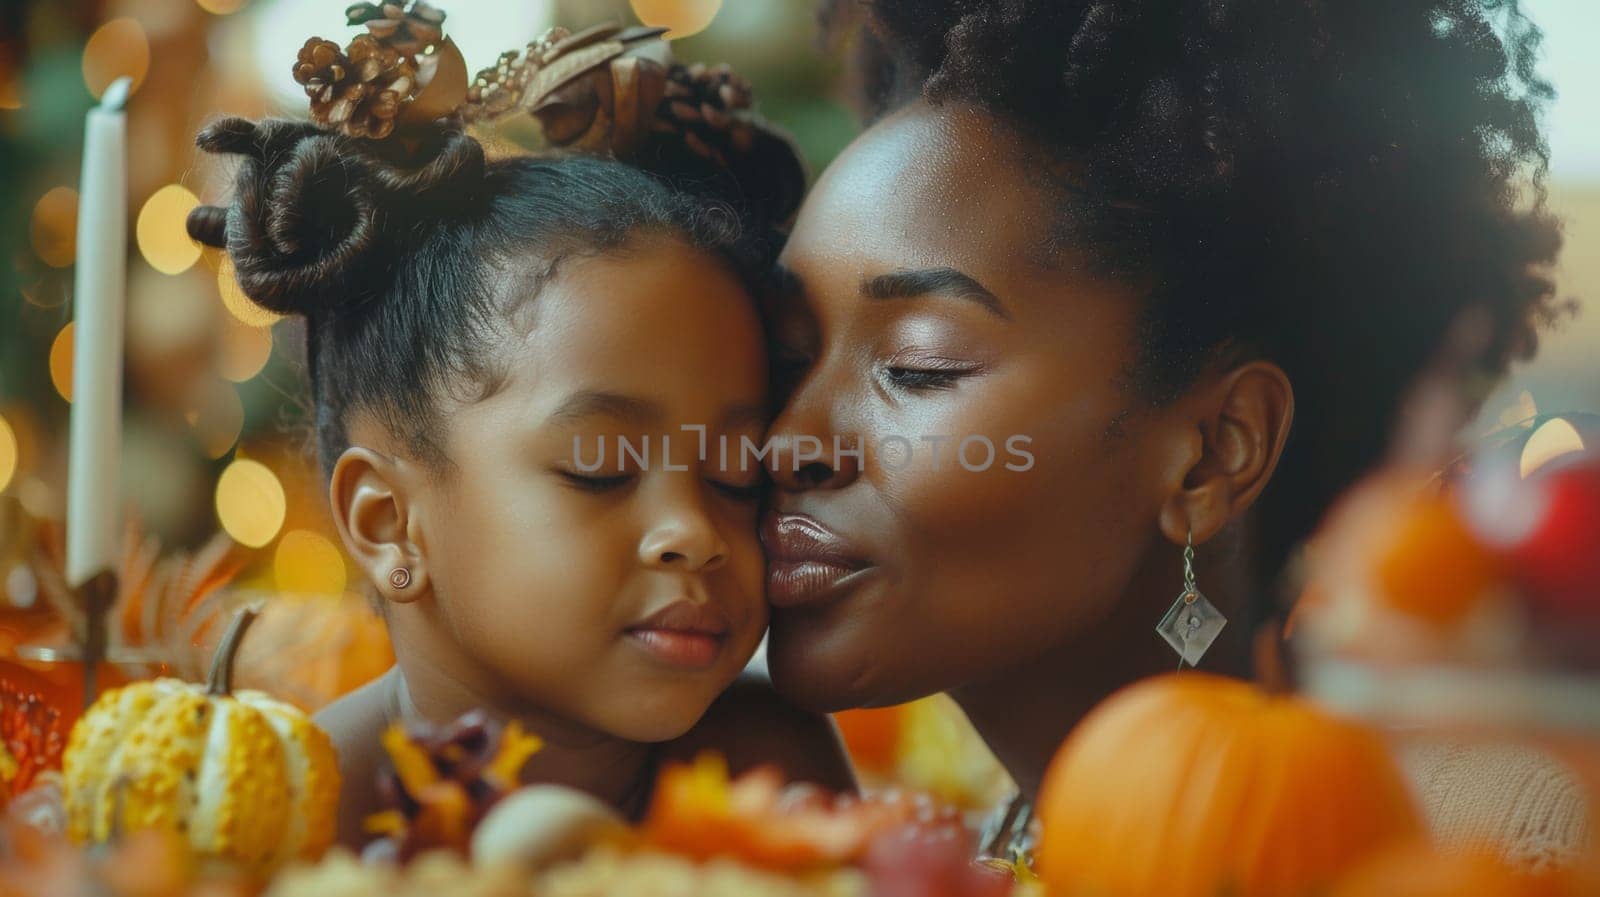 A woman and child kissing each other in front of a table full of fall decorations